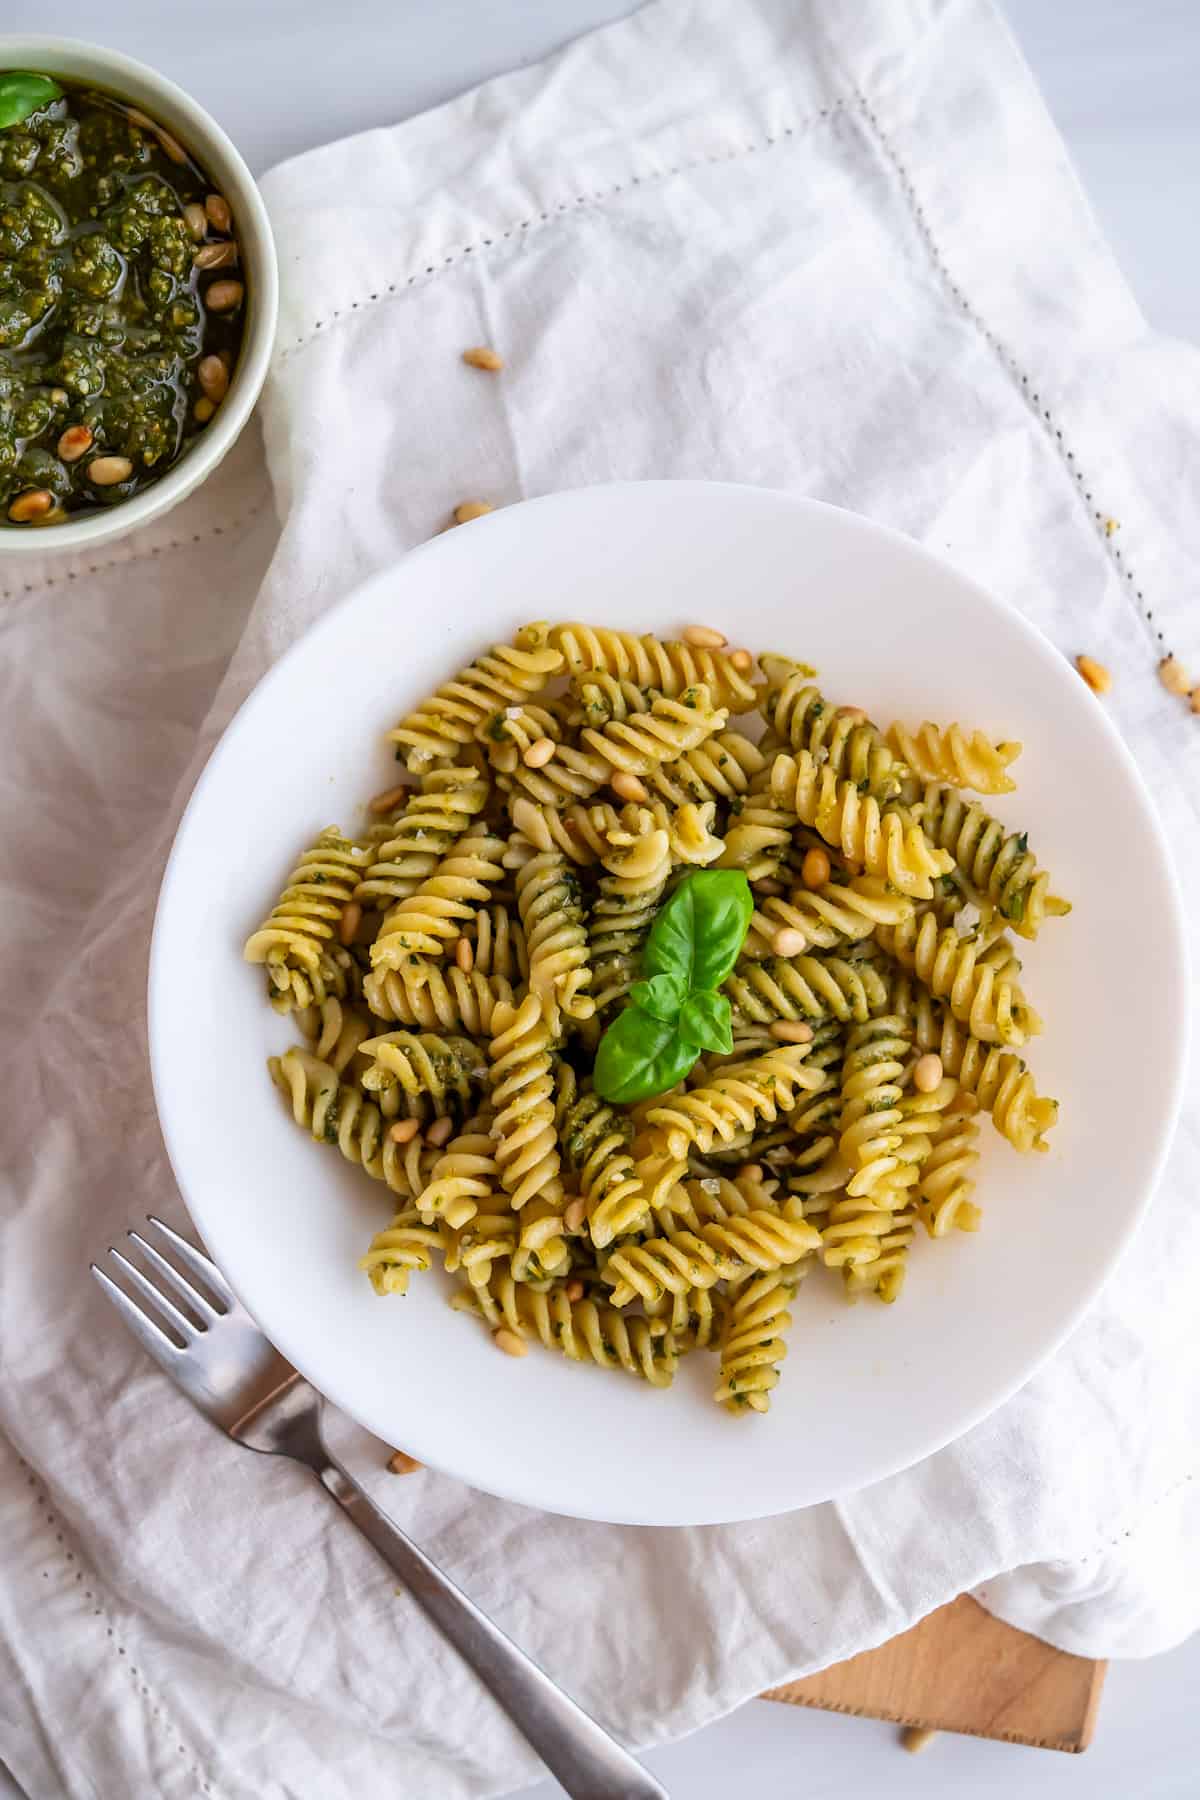 A bowl of pesto pasta garnished with basil leaves and toasted pine nuts.